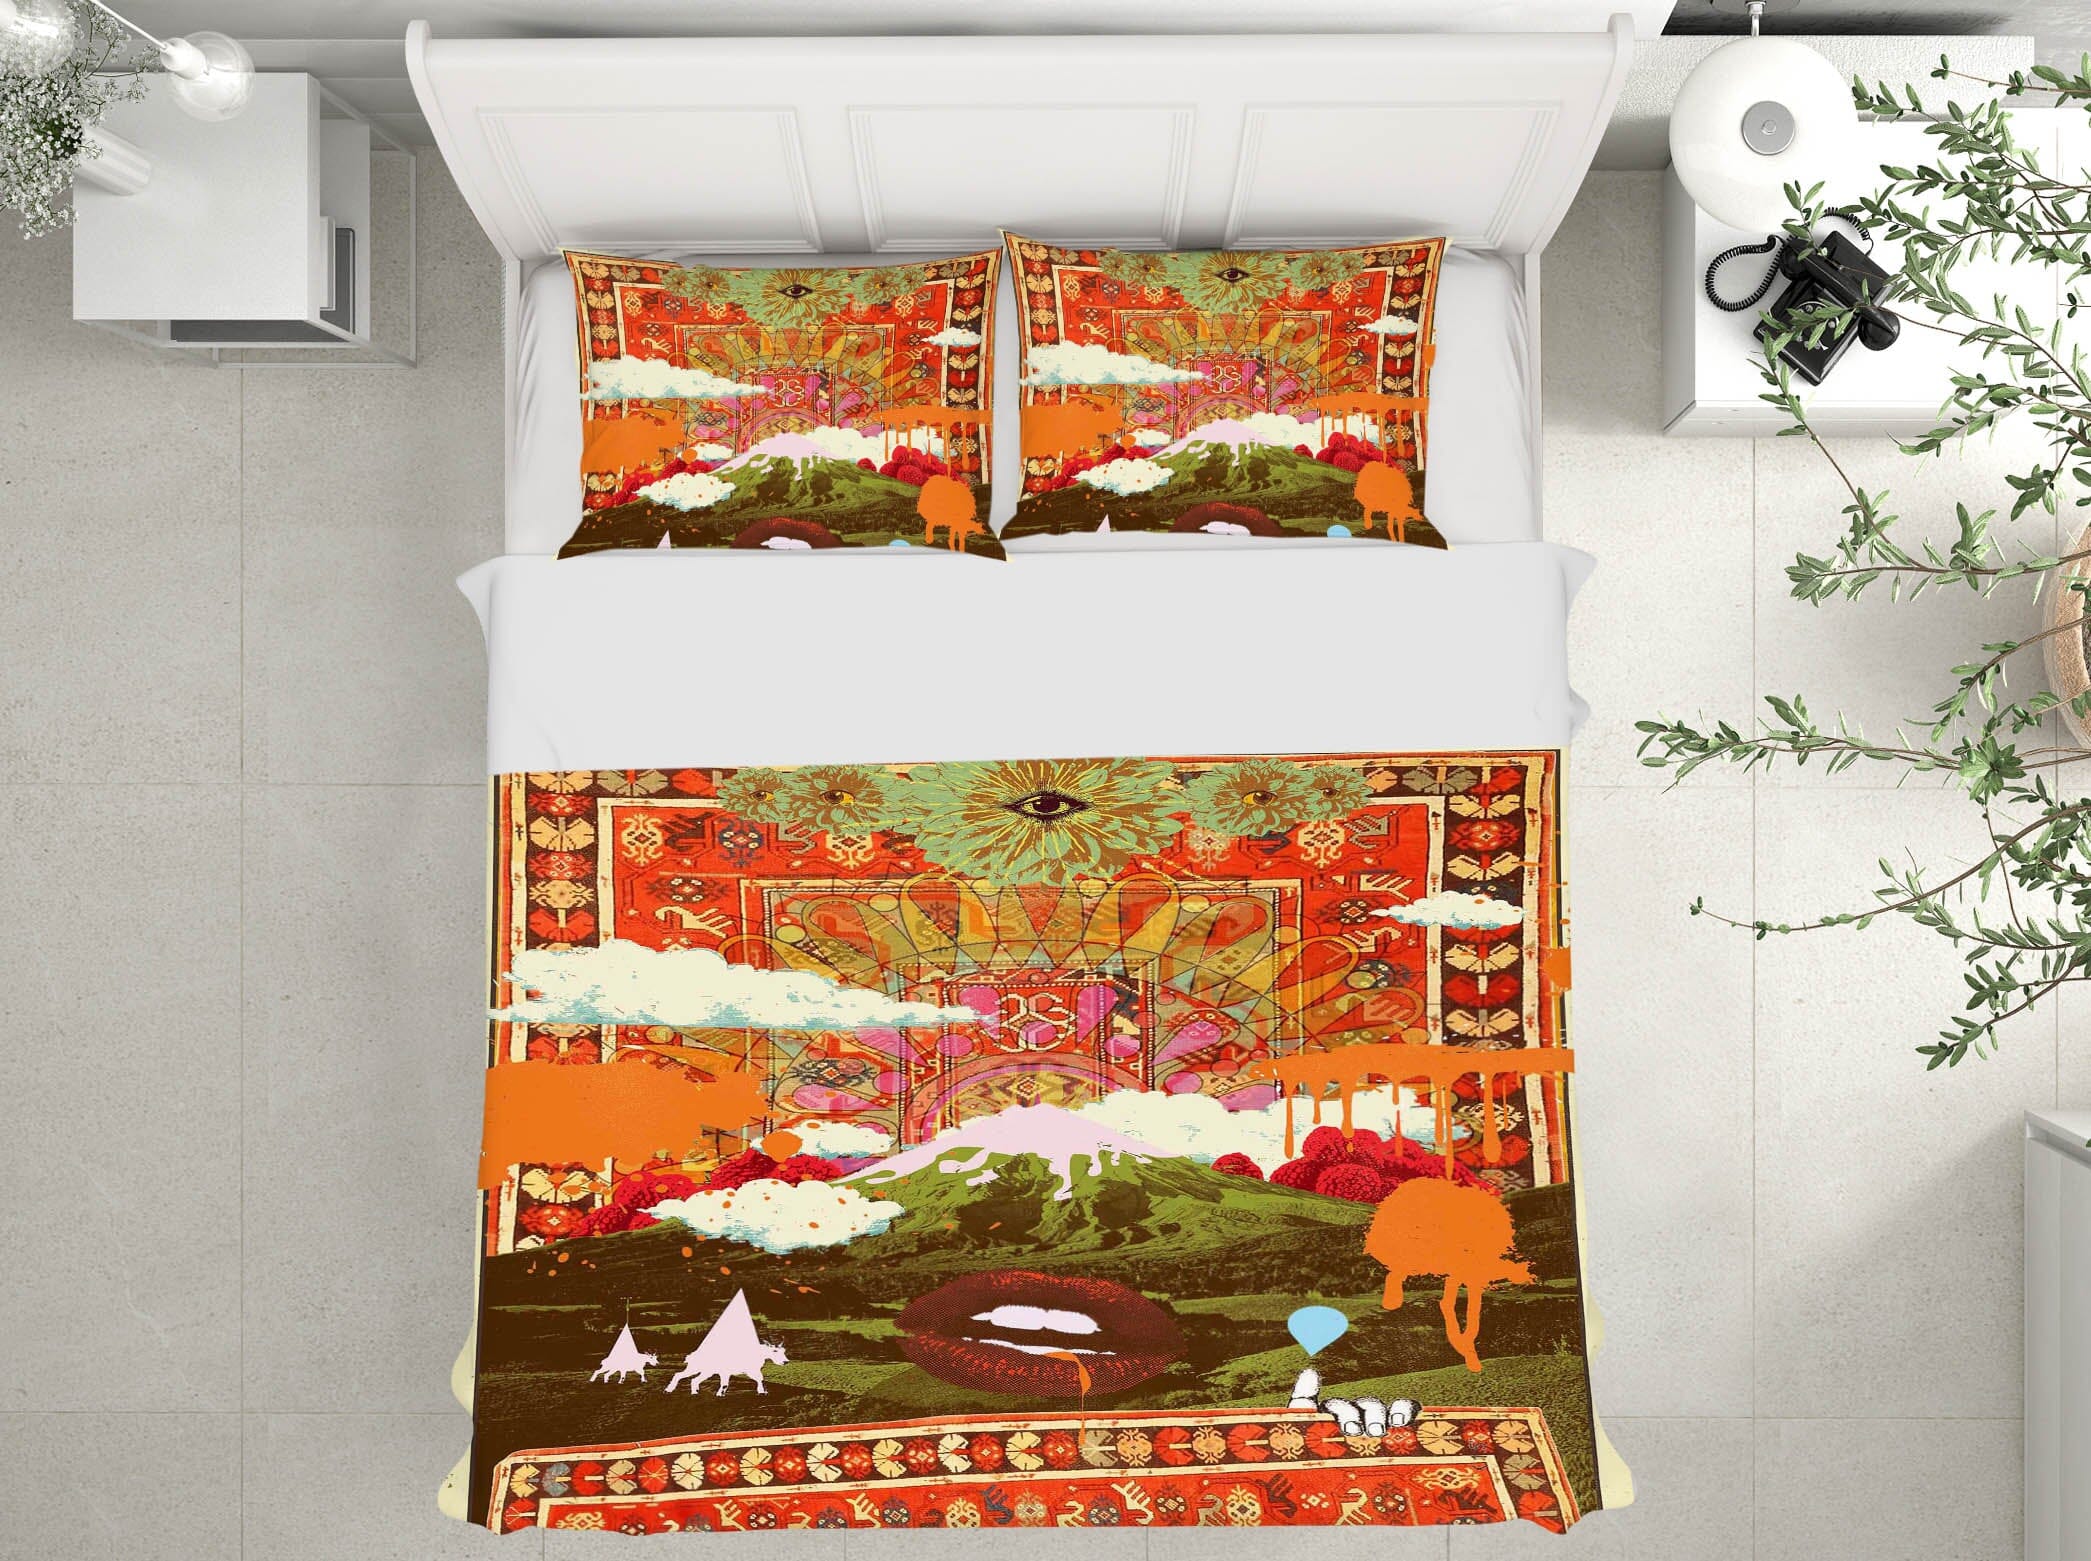 3D Flower Village 2109 Showdeer Bedding Bed Pillowcases Quilt Quiet Covers AJ Creativity Home 